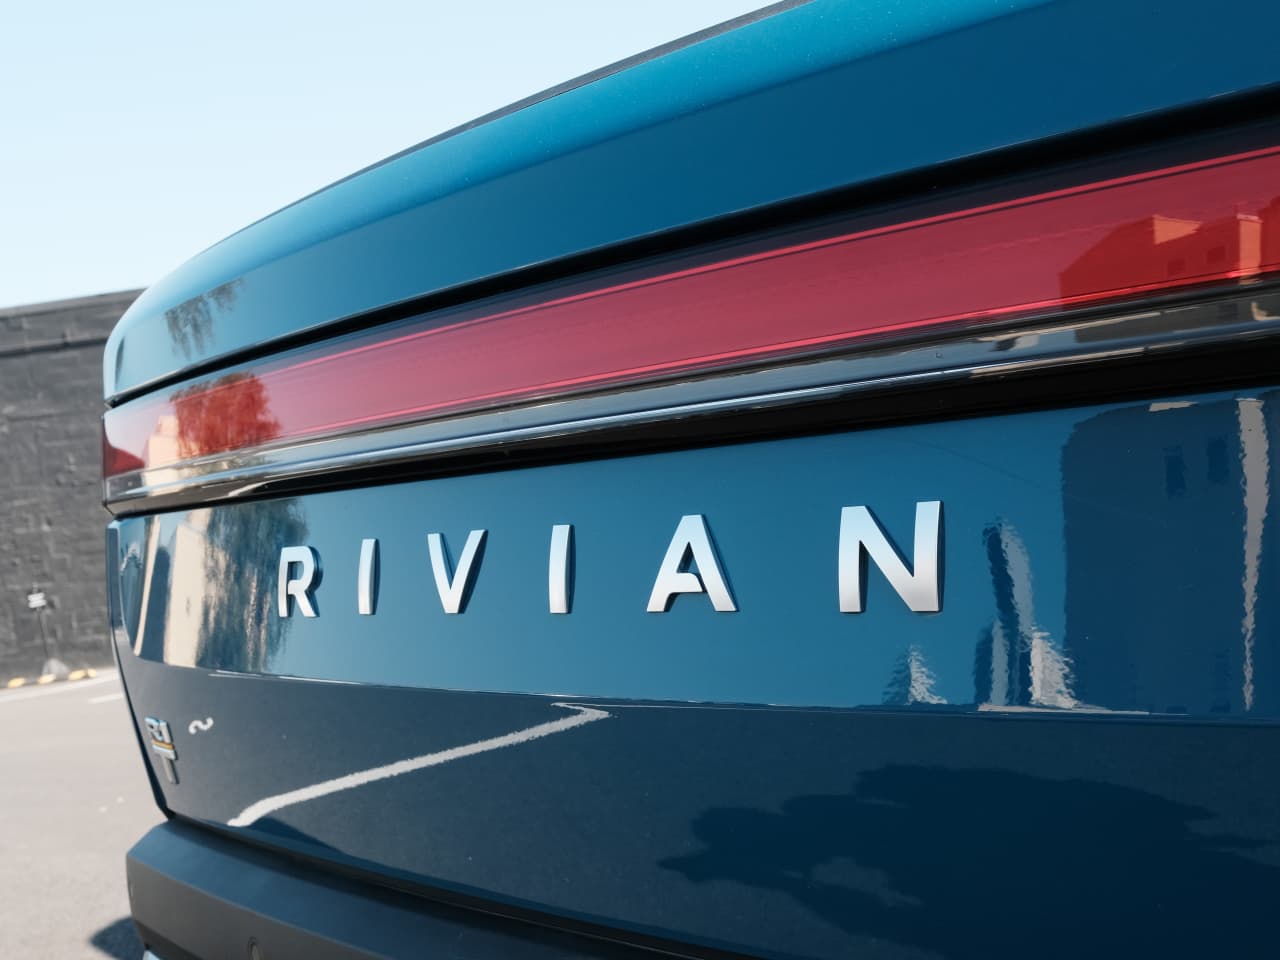 Rivian Rebounds Despite Losing 8 Billion: Focus on High End EVs and Investing in Autonomous Driving & Battery Improvements